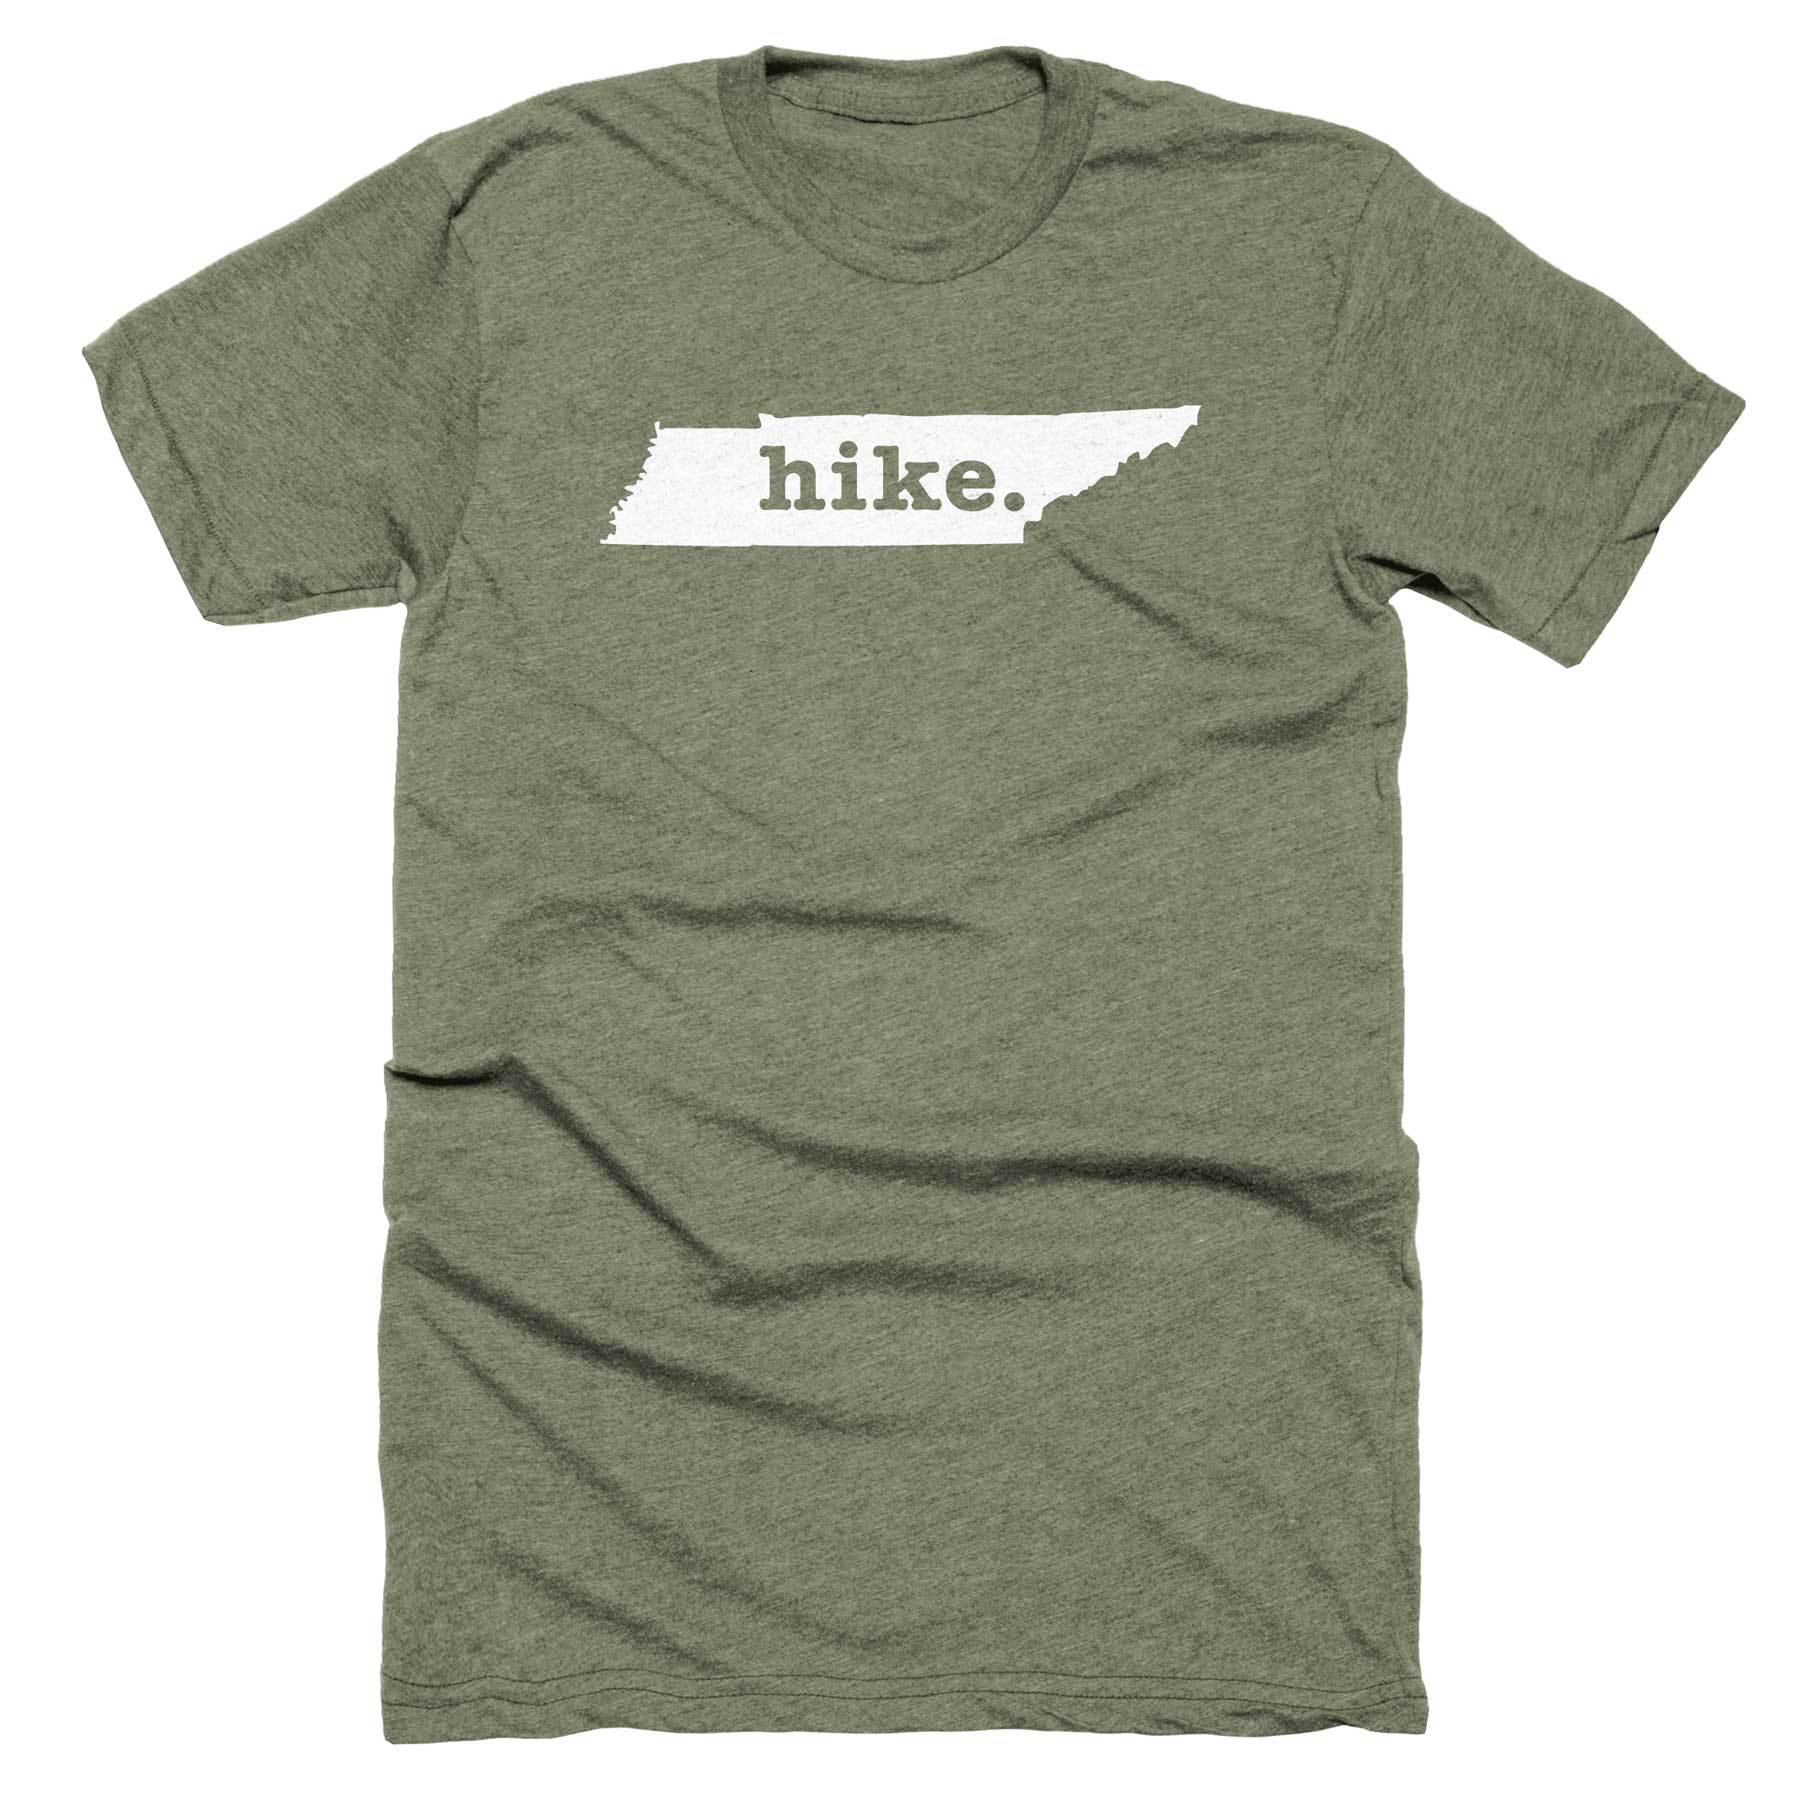 Tennessee Hike Home T-Shirt